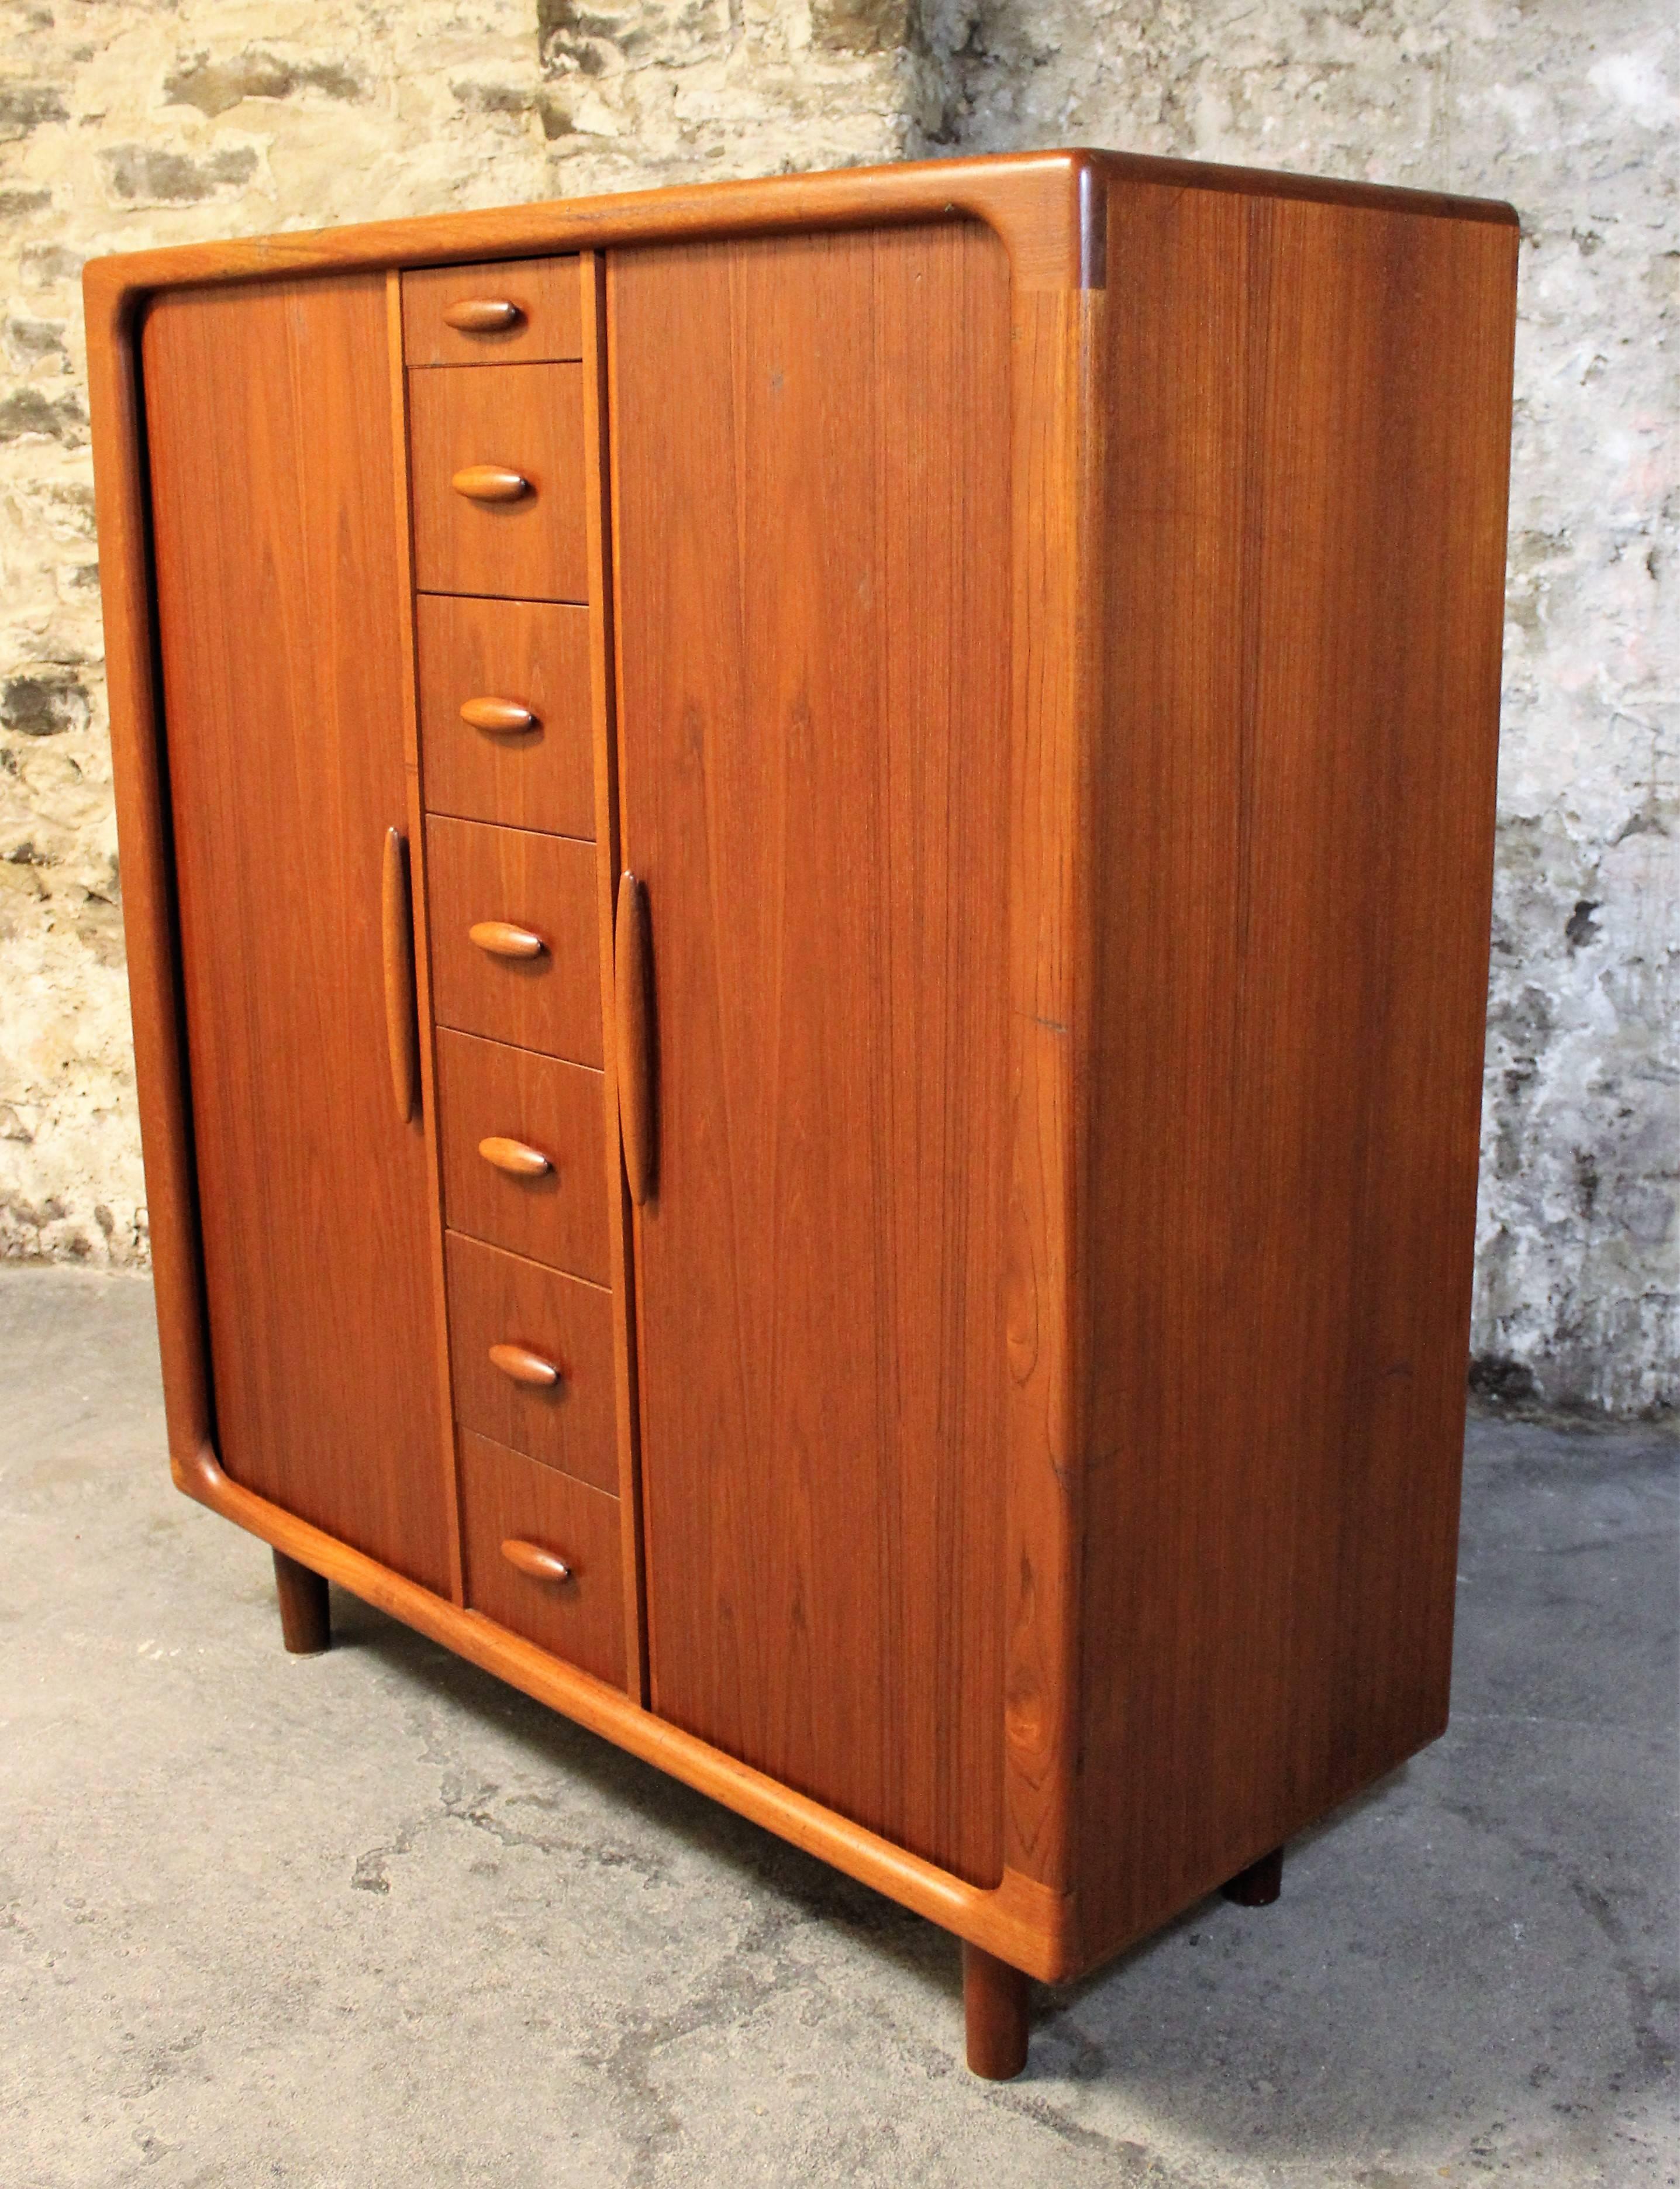 Stunning well-built Danish Modern gentlemen’s chest / dresser in vintage teak by Dyrlund. This chest offers simple graceful lines and heavy construction. It is highly versatile and features an amazing amount of storage space in a small footprint.